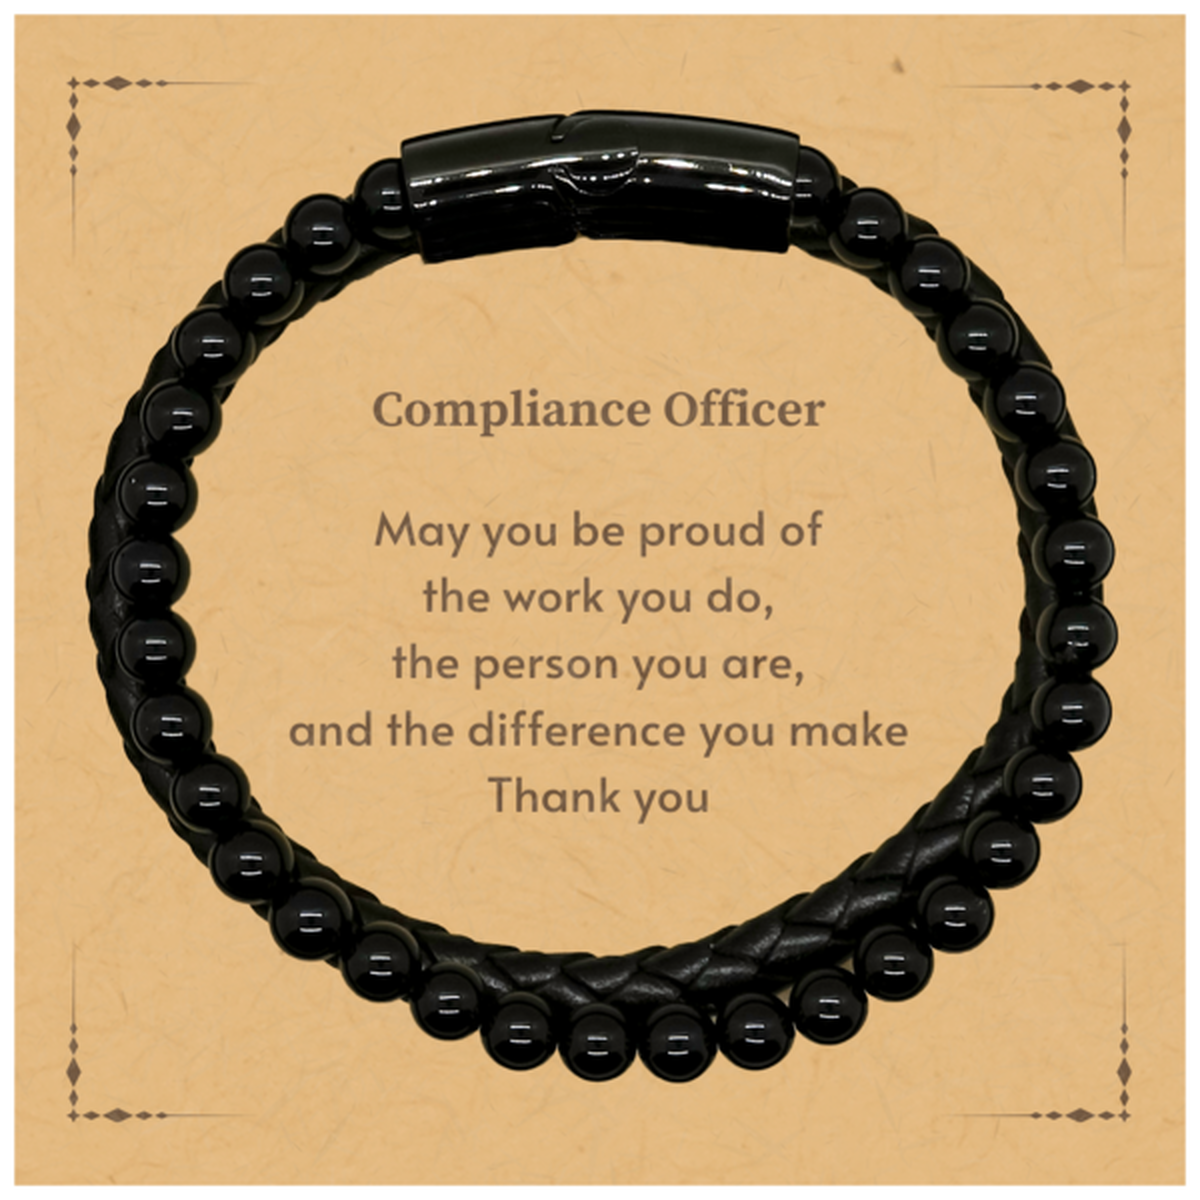 Heartwarming Stone Leather Bracelets Retirement Coworkers Gifts for Compliance Officer, Compliance Officer May You be proud of the work you do, the person you are Gifts for Boss Men Women Friends